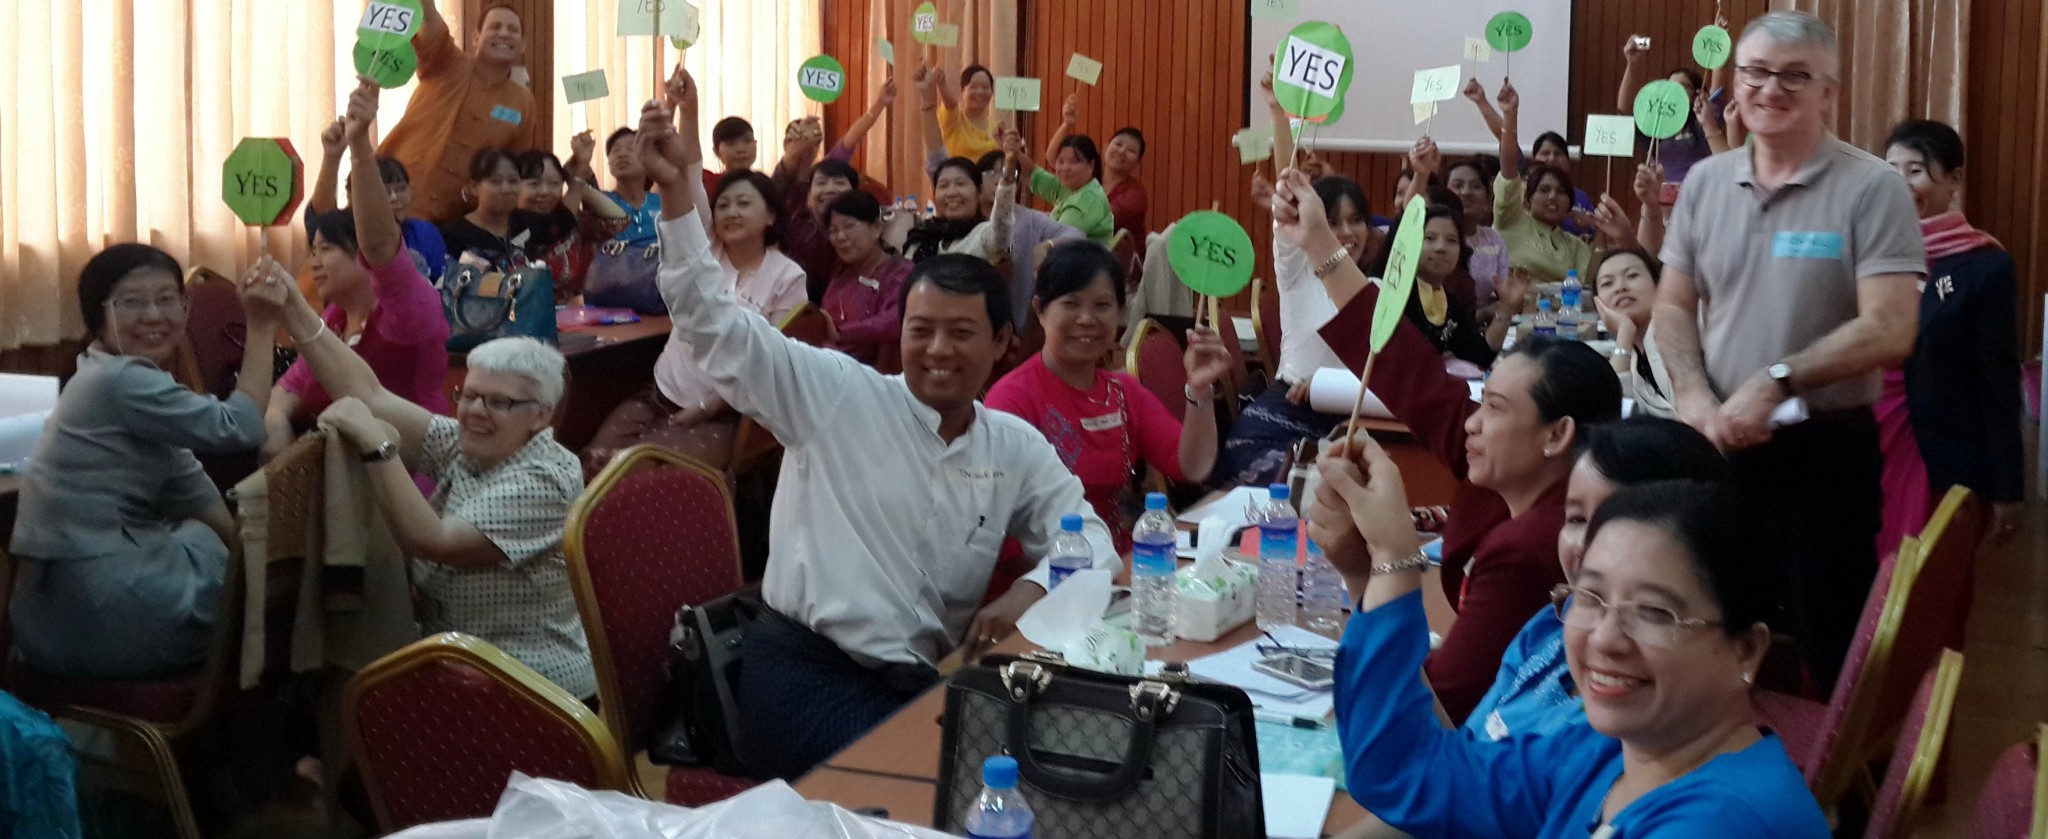 “YES” for CLE in Myanmar